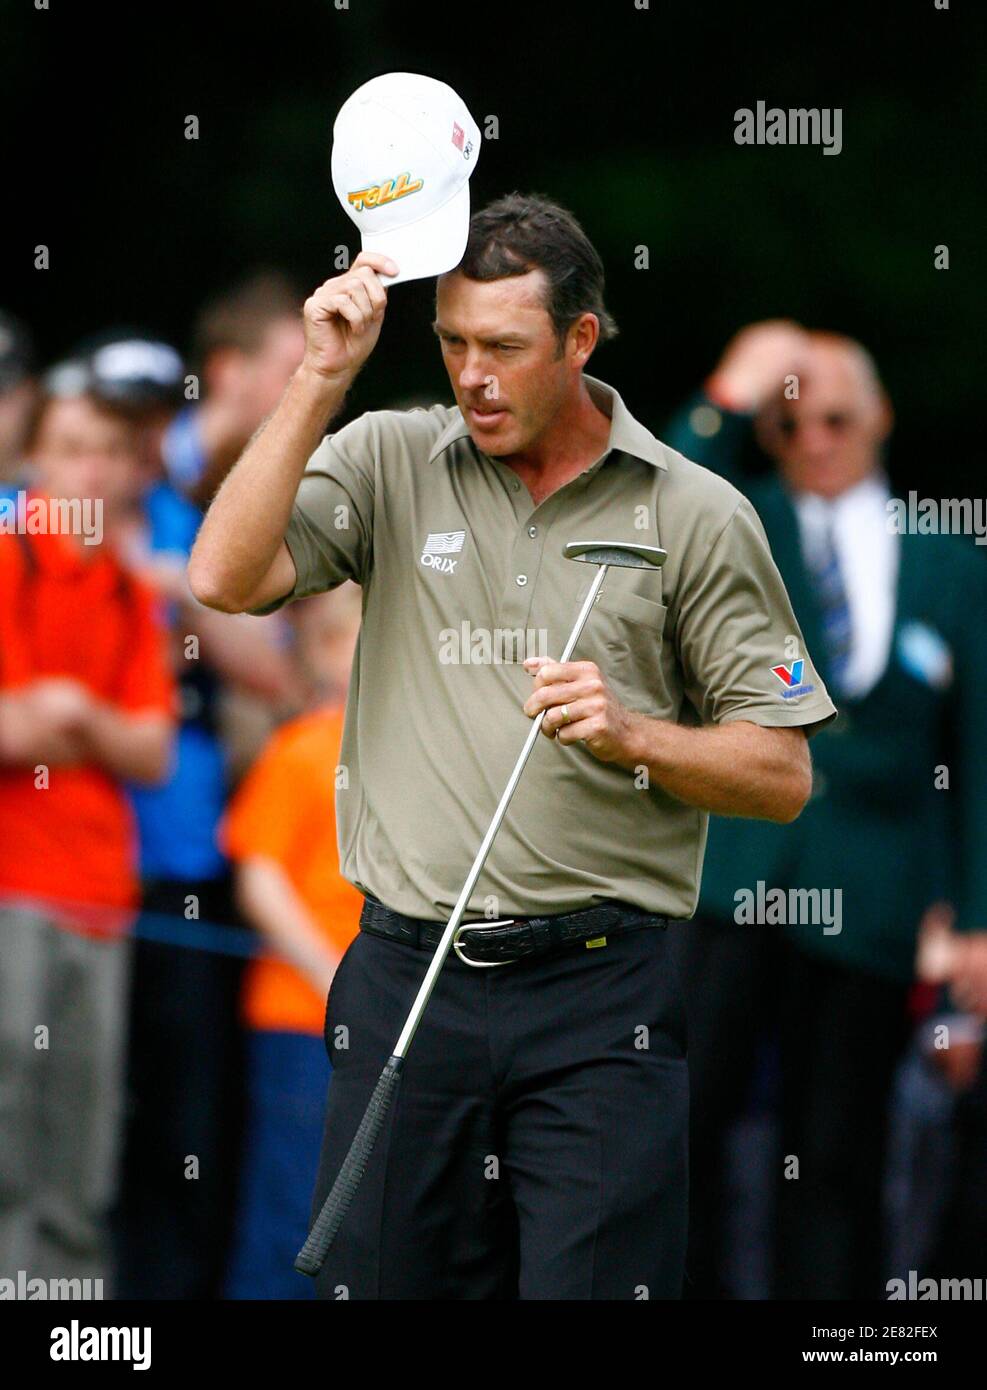 Australia's Richard Green acknowledges crowd at the eighteenth green after his final round of the Scottish Open golf tournament at Loch Lommond near Glasgow, Scotland July 13, 2008. REUTERS/David Moir (BRITAIN) Stock Photo